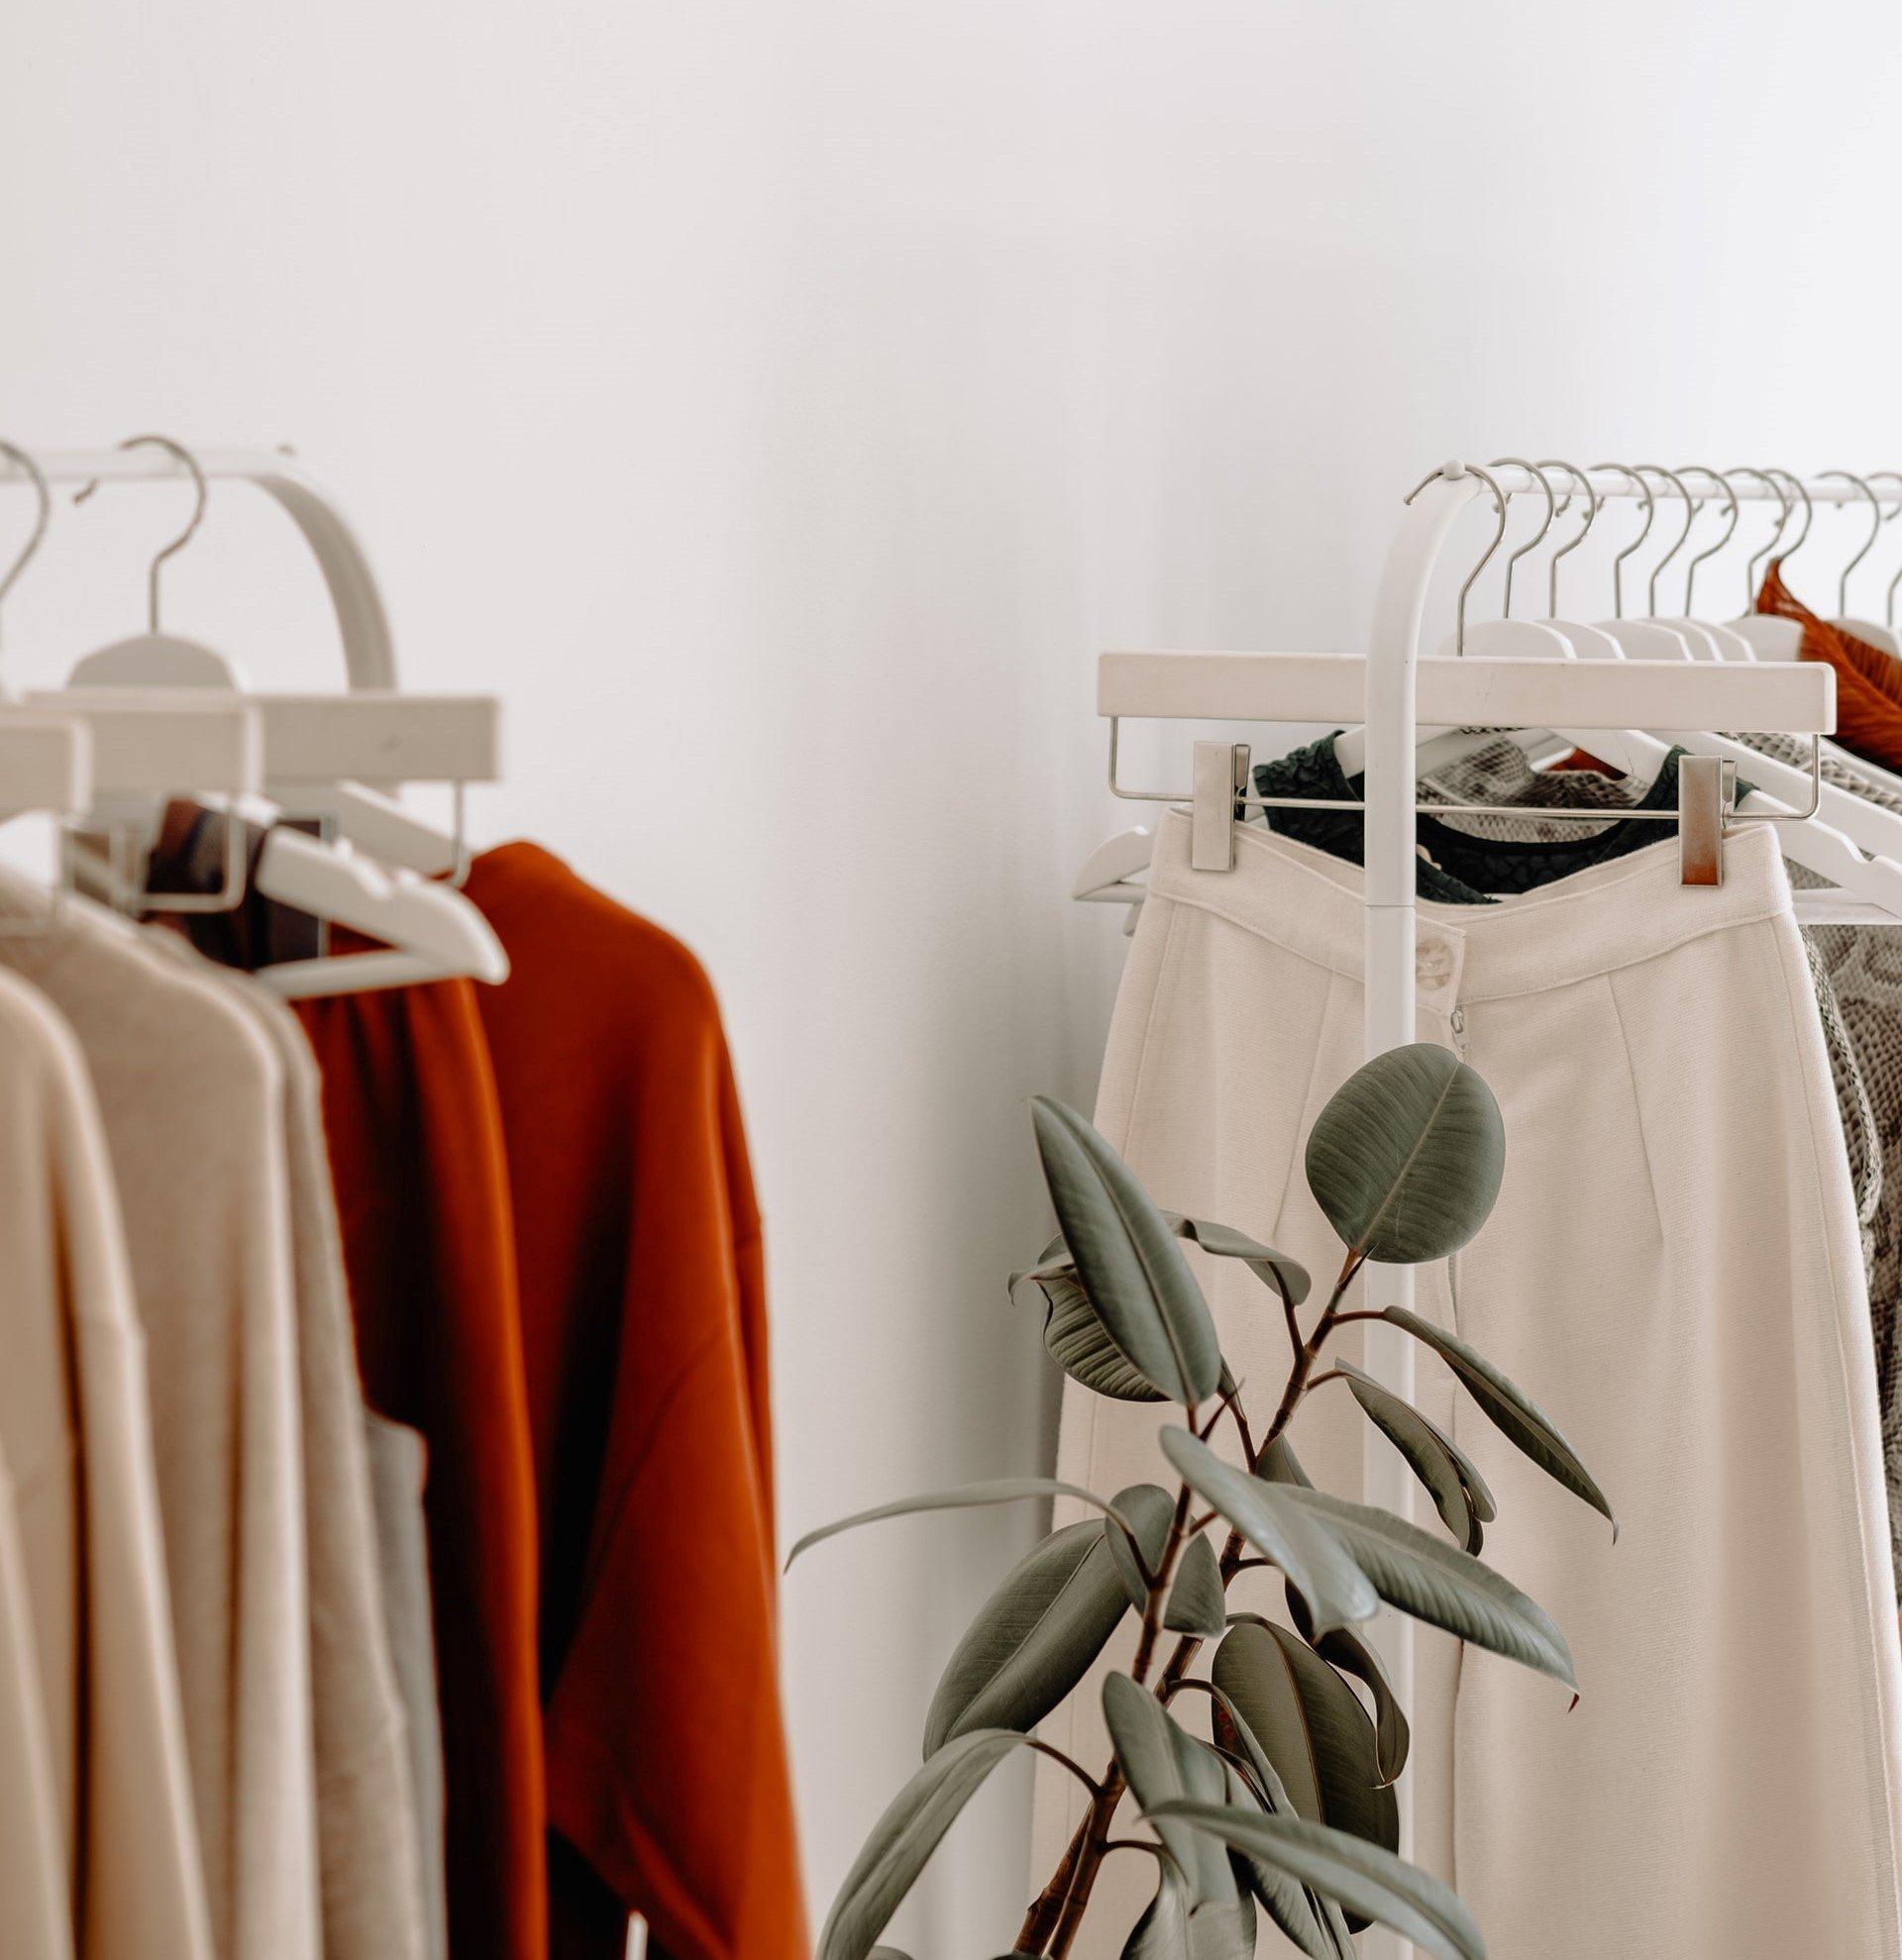 10 Ways to Shop More Sustainably